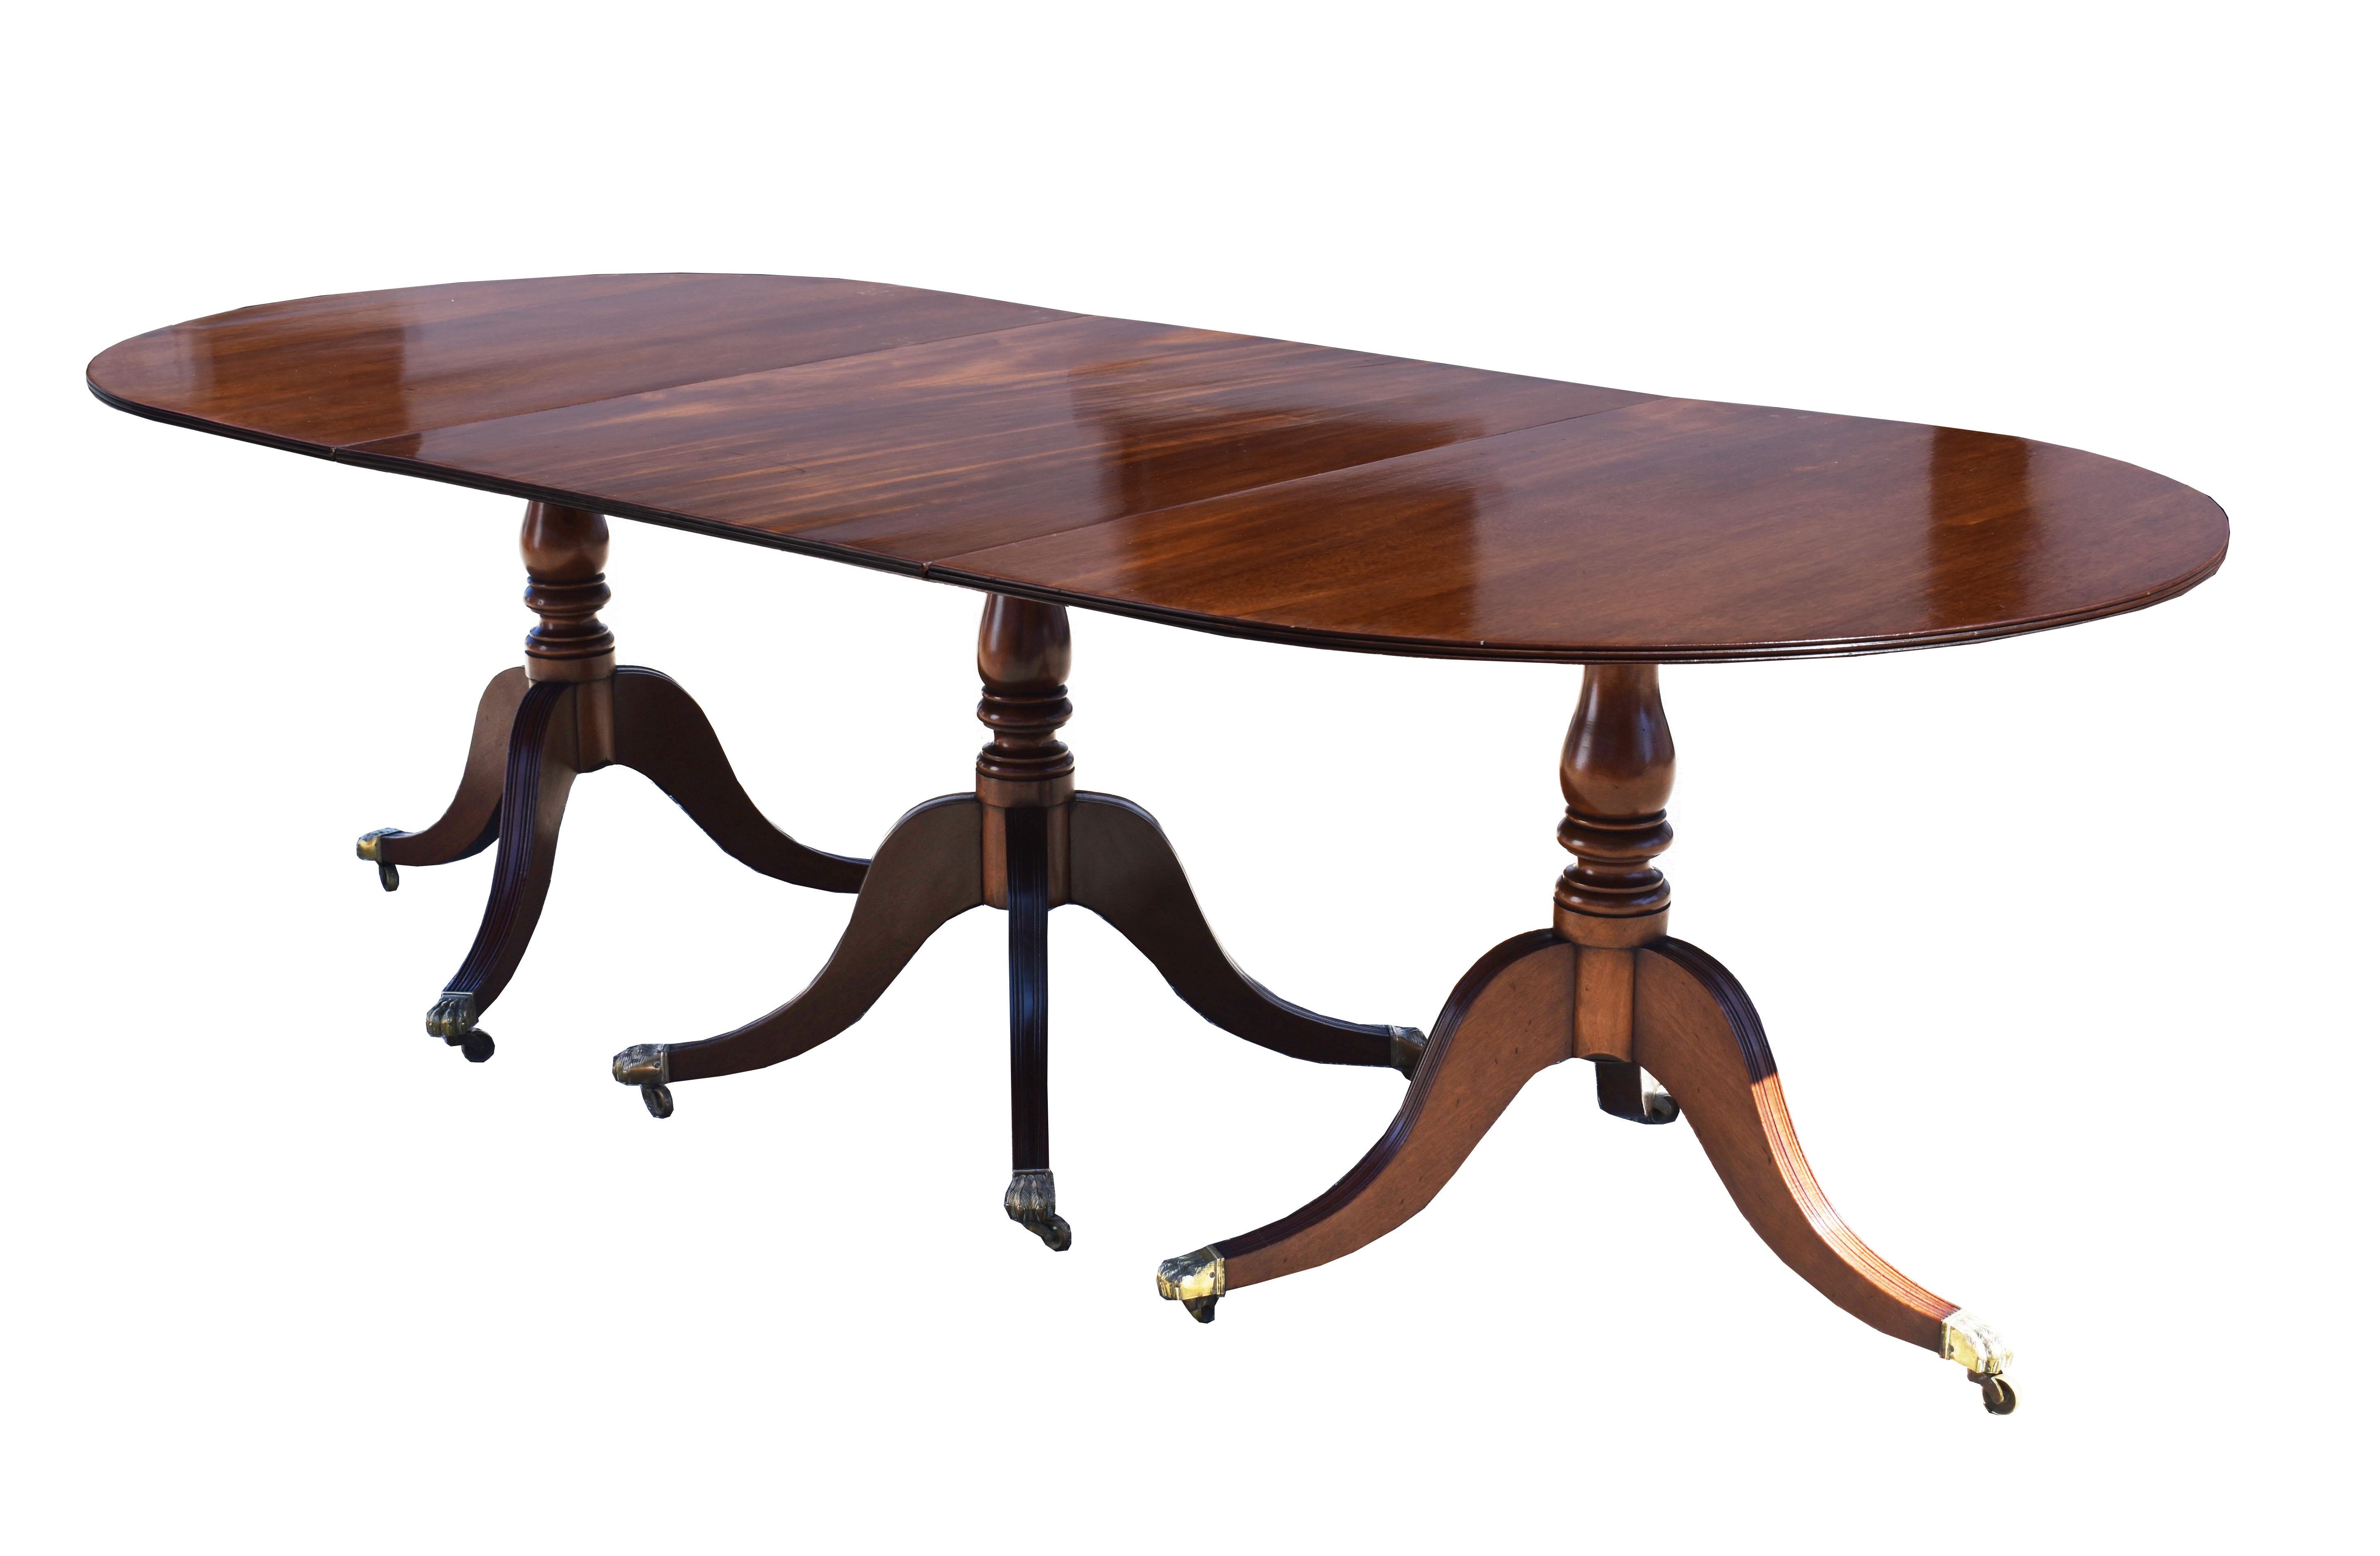 For sale is a good quality antique Regency style mahogany pedestal dining table. The tops supported by four pedestals. The table can be used with all four pedestals and leaves for maximum length, or can be reduced by removing pedestals and leaves to